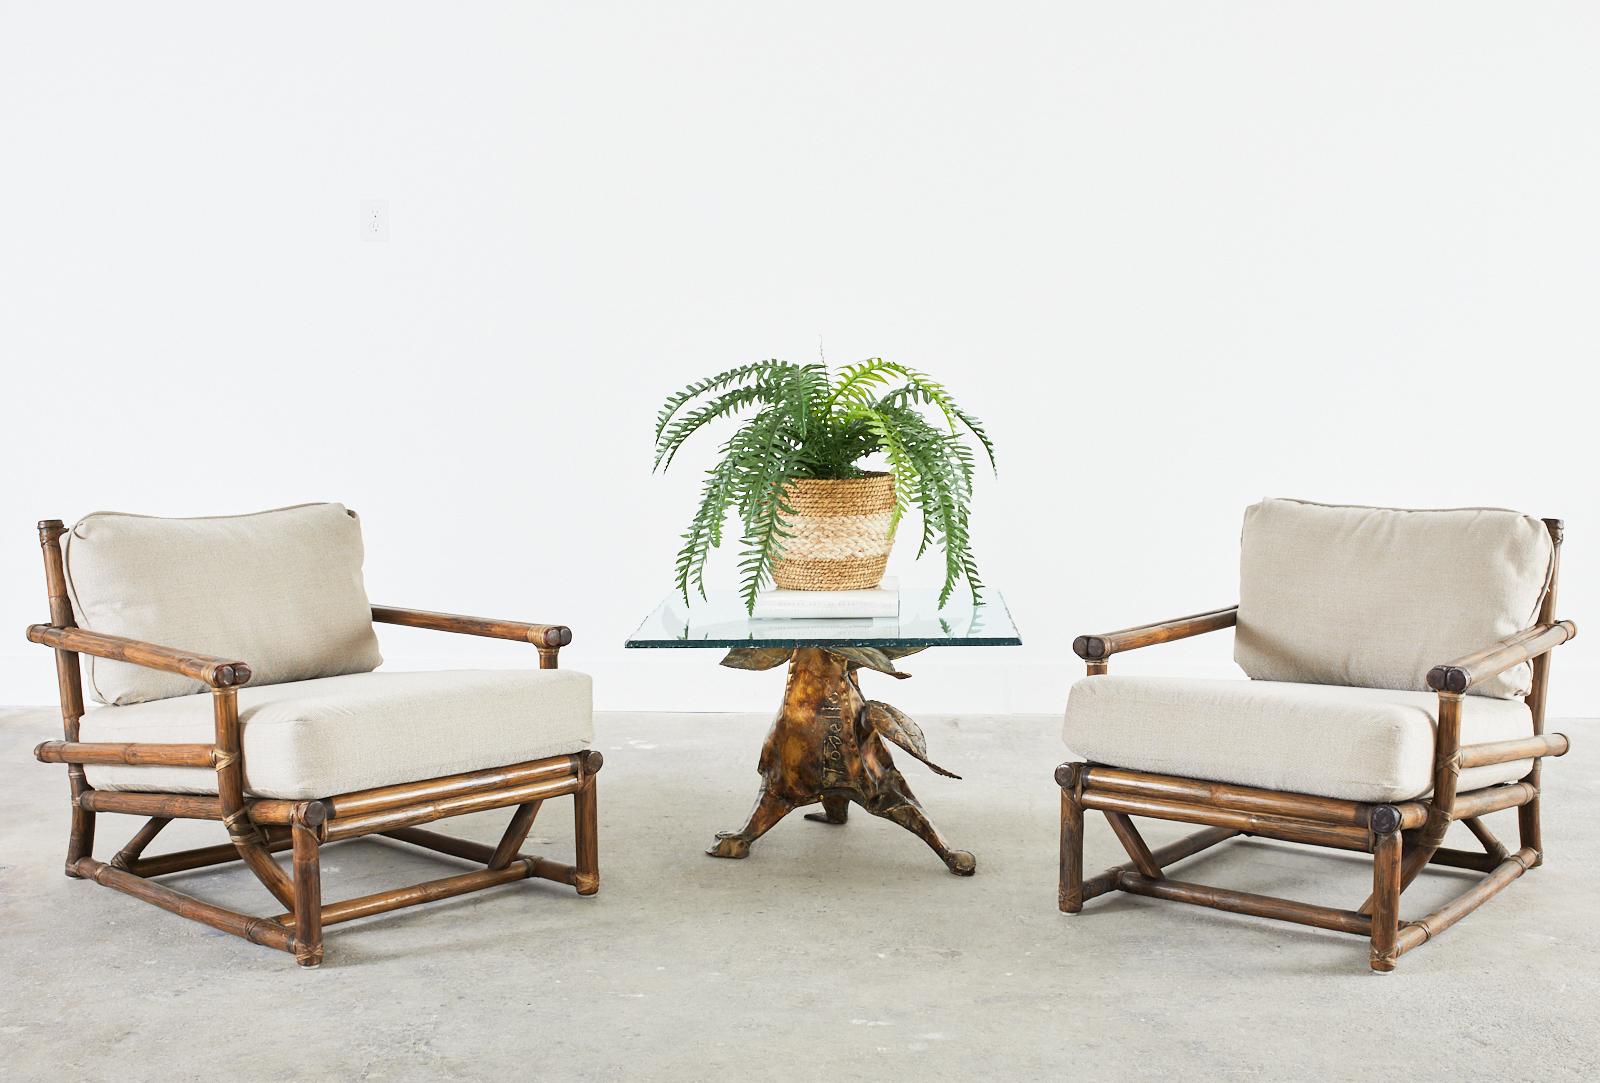 Stylish pair of rare McGuire lounge chairs with a low profile in the Asian style. Late 20th century creations made in the California organic modern style by McGuire. The chairs feature thick rattan poles lashed together with leather rawhide laces